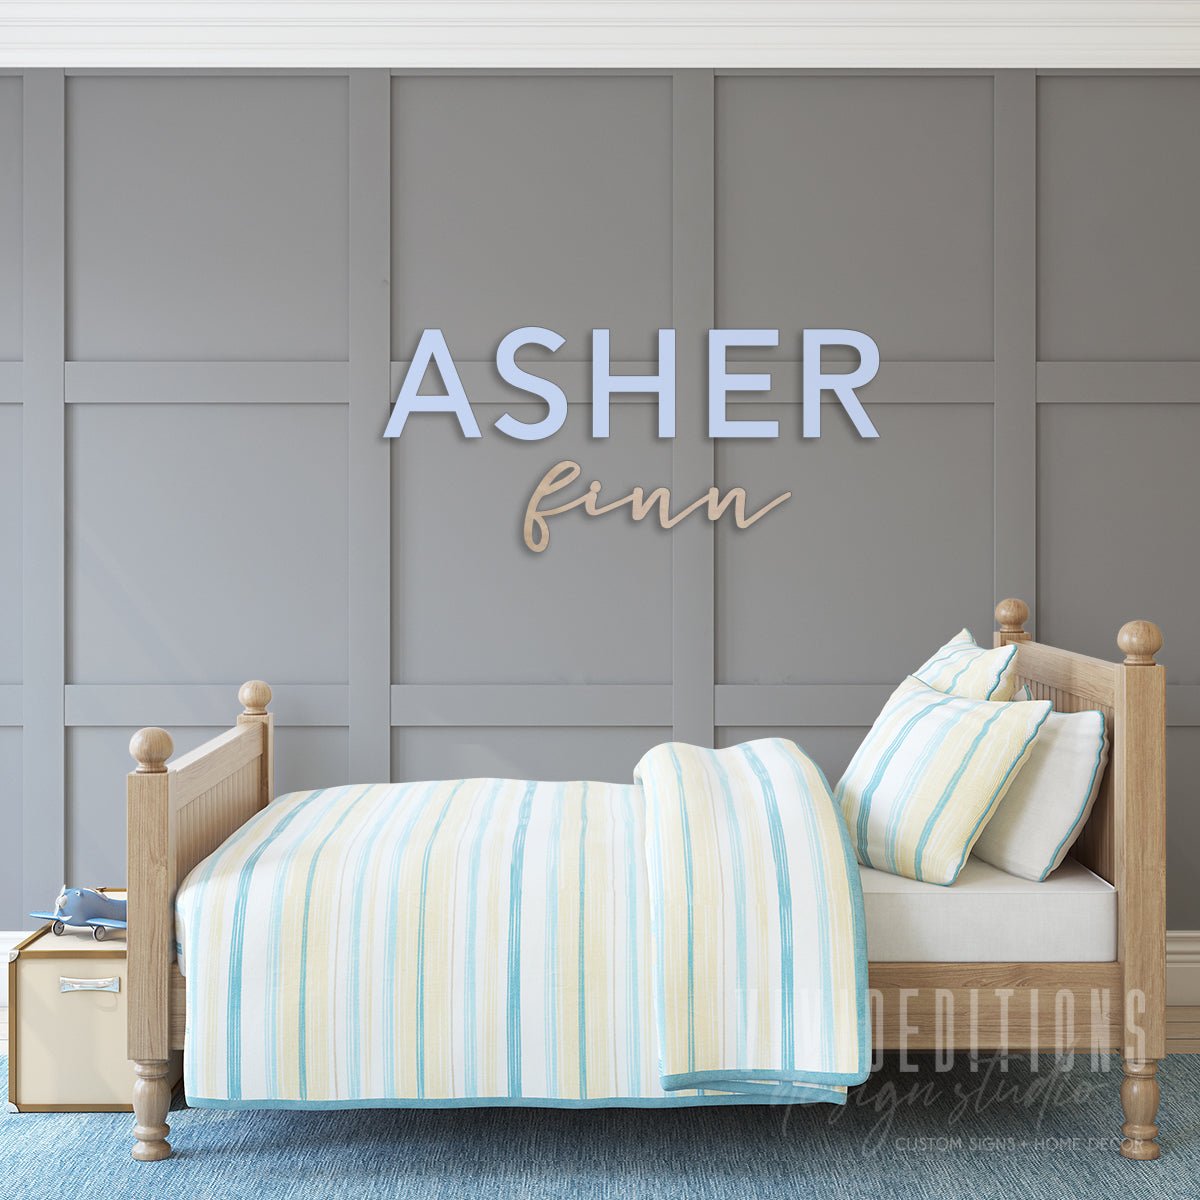 First & Middle Nursery Name Sign, Acrylic or Wood - 2pc Set Name Sign - VividEditions